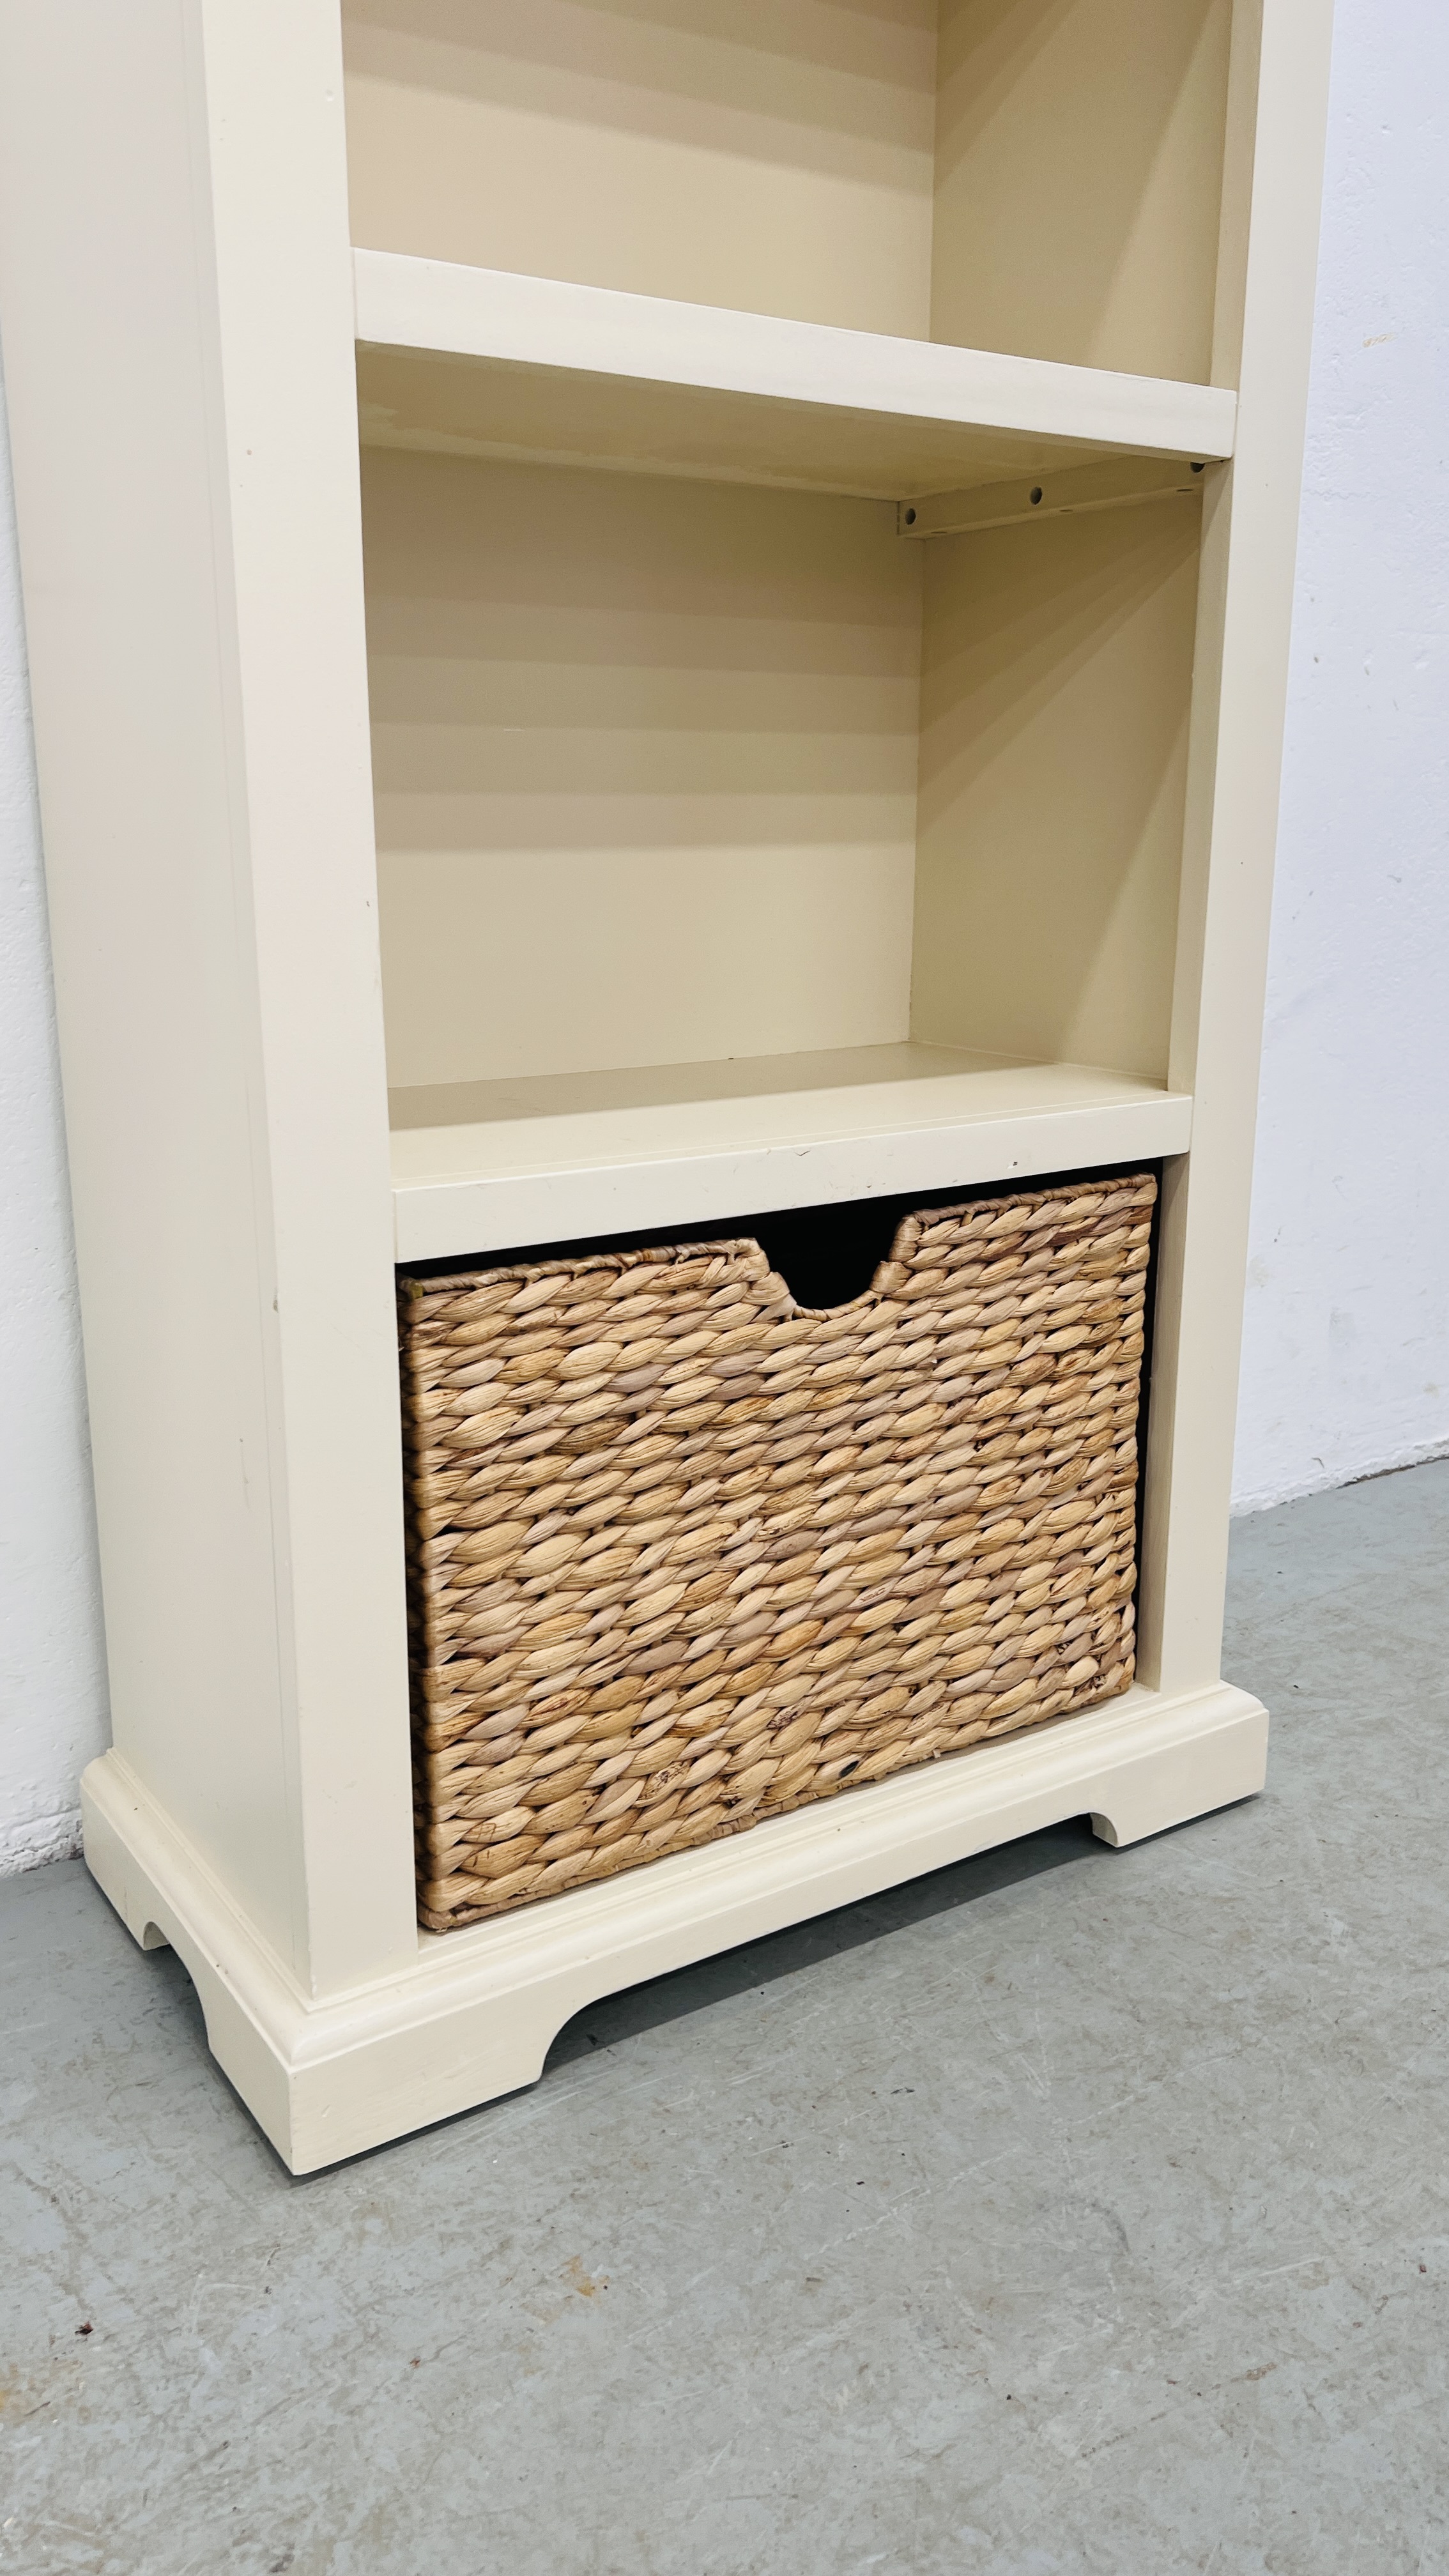 MODERN WHITE FINISH FULL HEIGHT OPEN BOOKSHELF WITH BASKET DRAWER TO BASE - W 60CM X D 30CM X H - Image 2 of 6